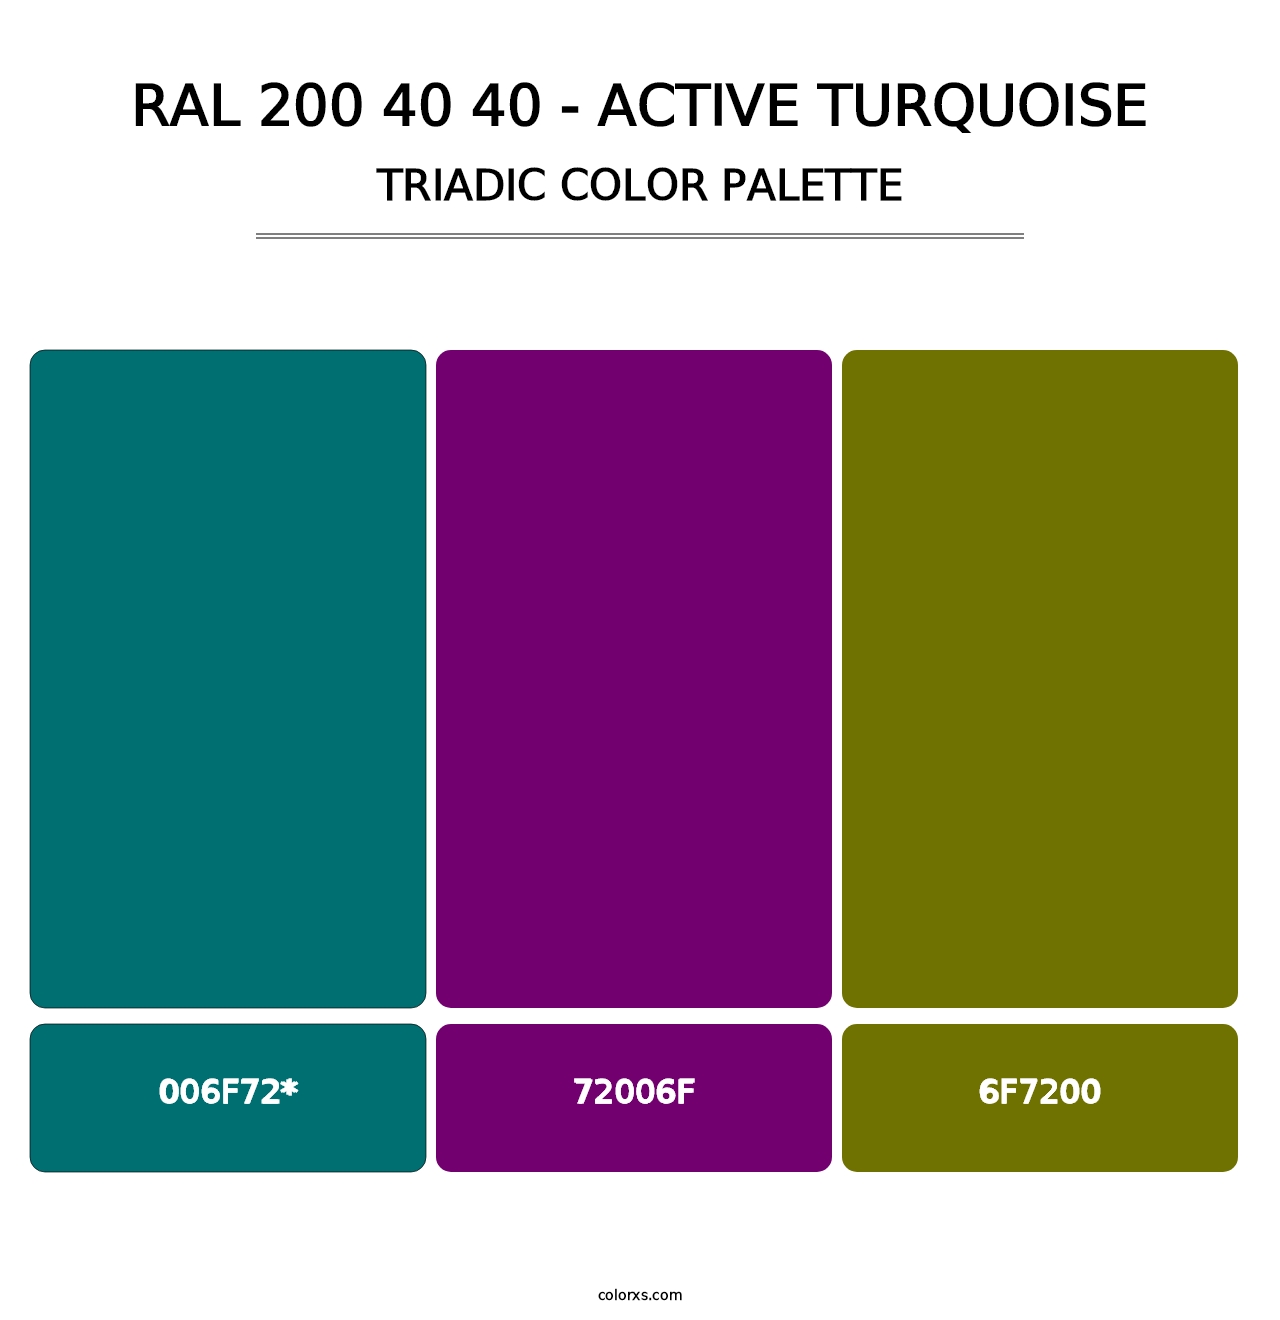 RAL 200 40 40 - Active Turquoise - Triadic Color Palette